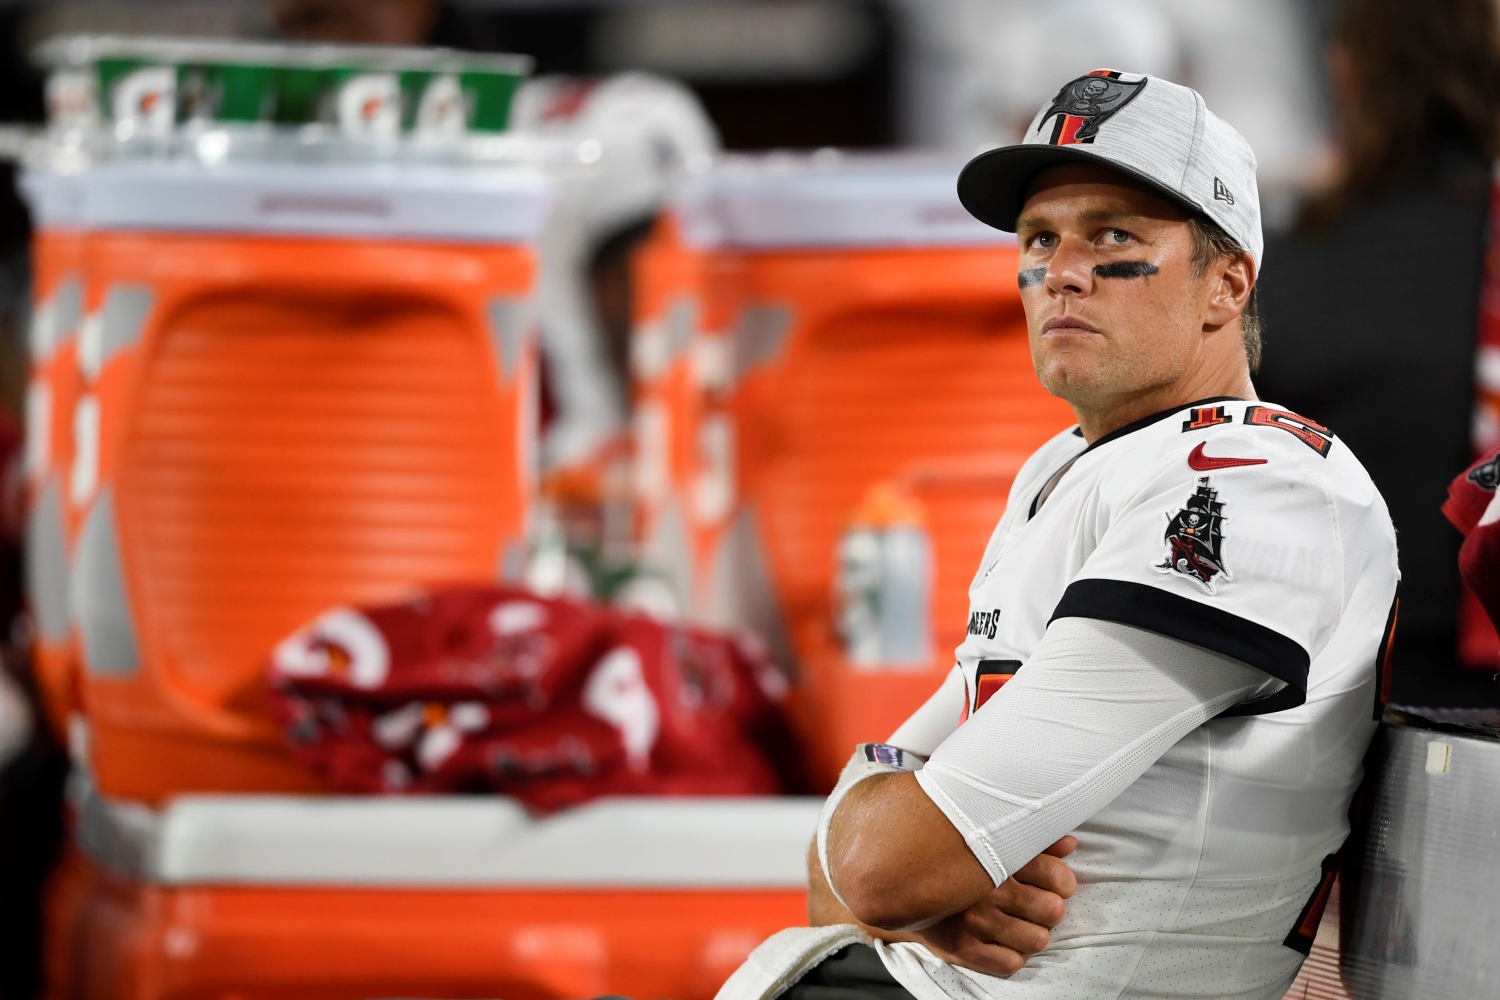 Tom Brady sits on the bench during a preseason game between the Tampa Bay Buccaneers and the Cincinnati Bengals.